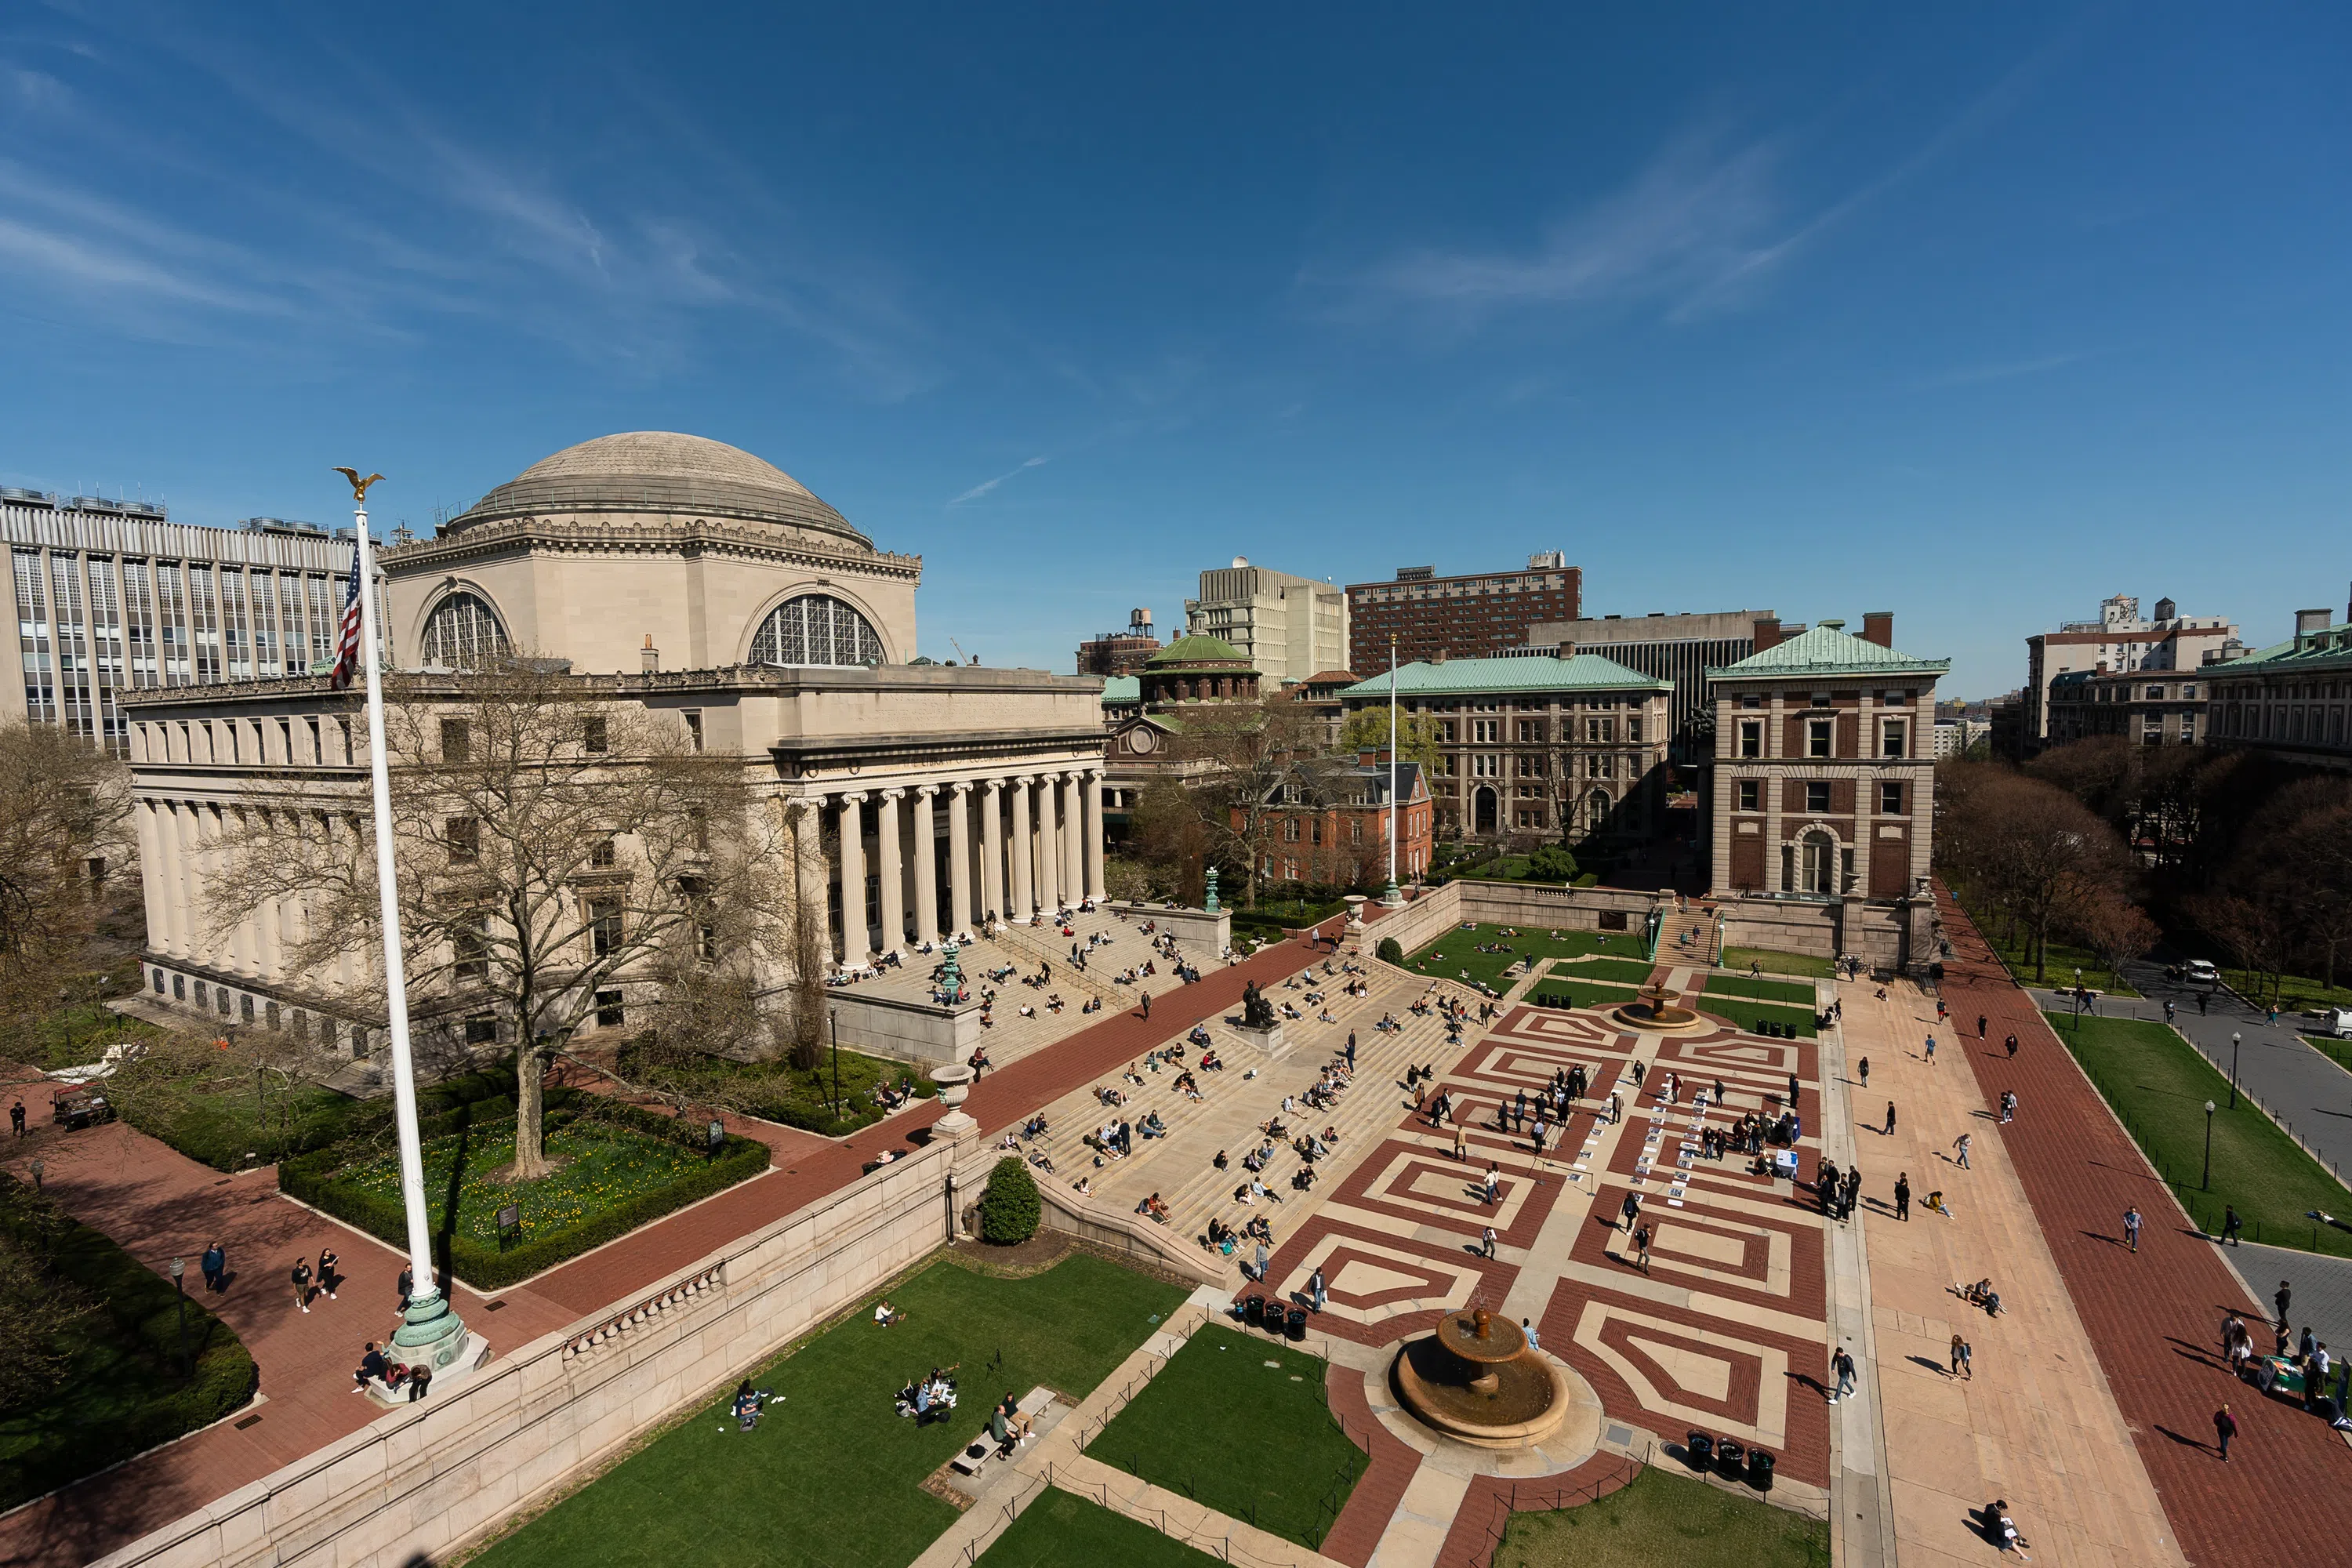 An aerial view of Low Library, a large dome shaped building with a set of stairs in front. Students are scattered across the quad.